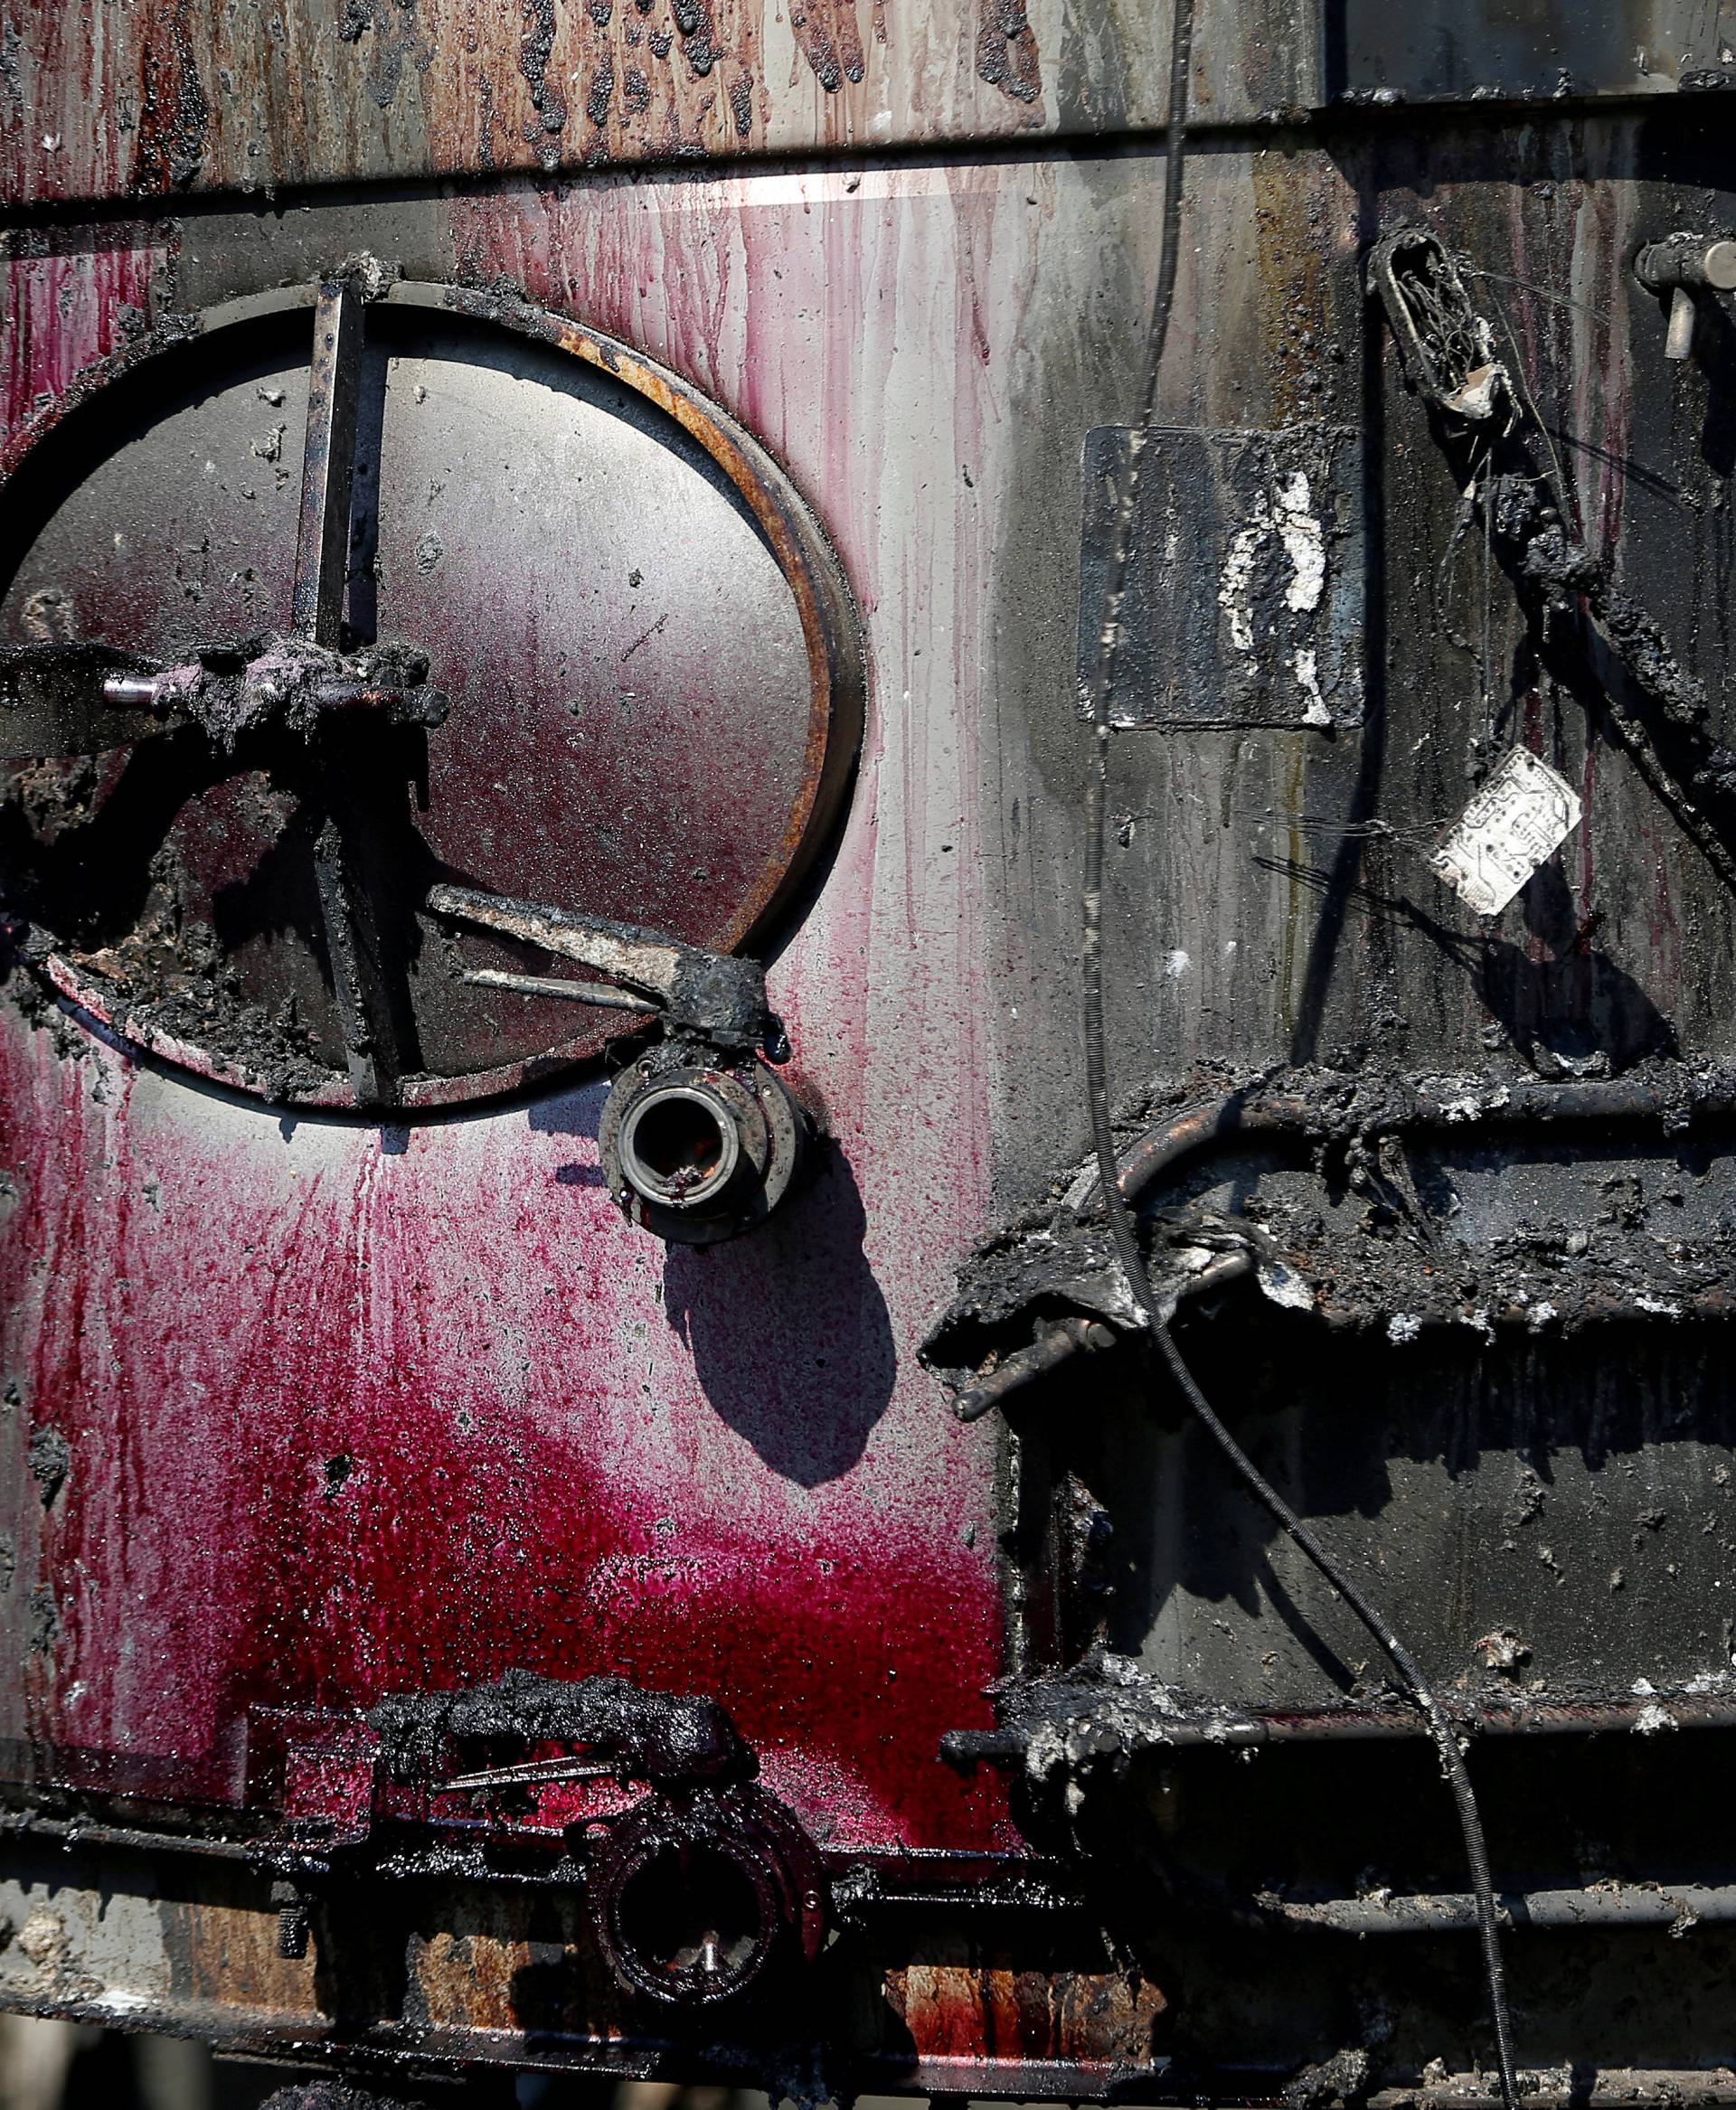 Wine stains are seen on a fermentation tank at Paradise Ridge Winery after being destroyed by the Tubbs Fire in Santa Rosa, California